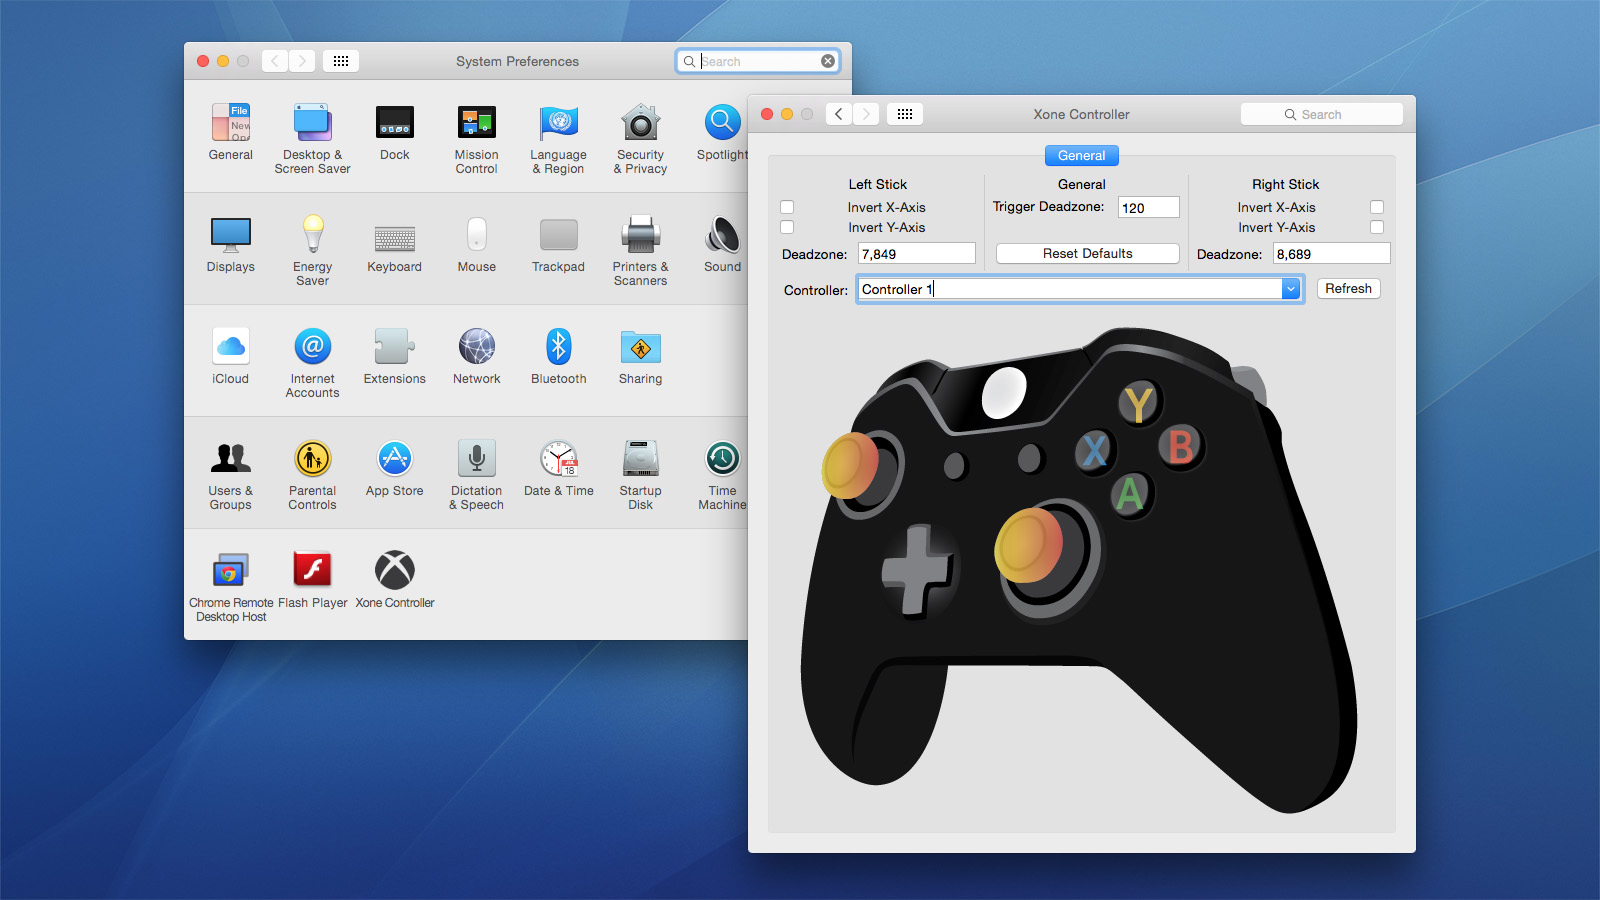 download dolphin emulator for mac